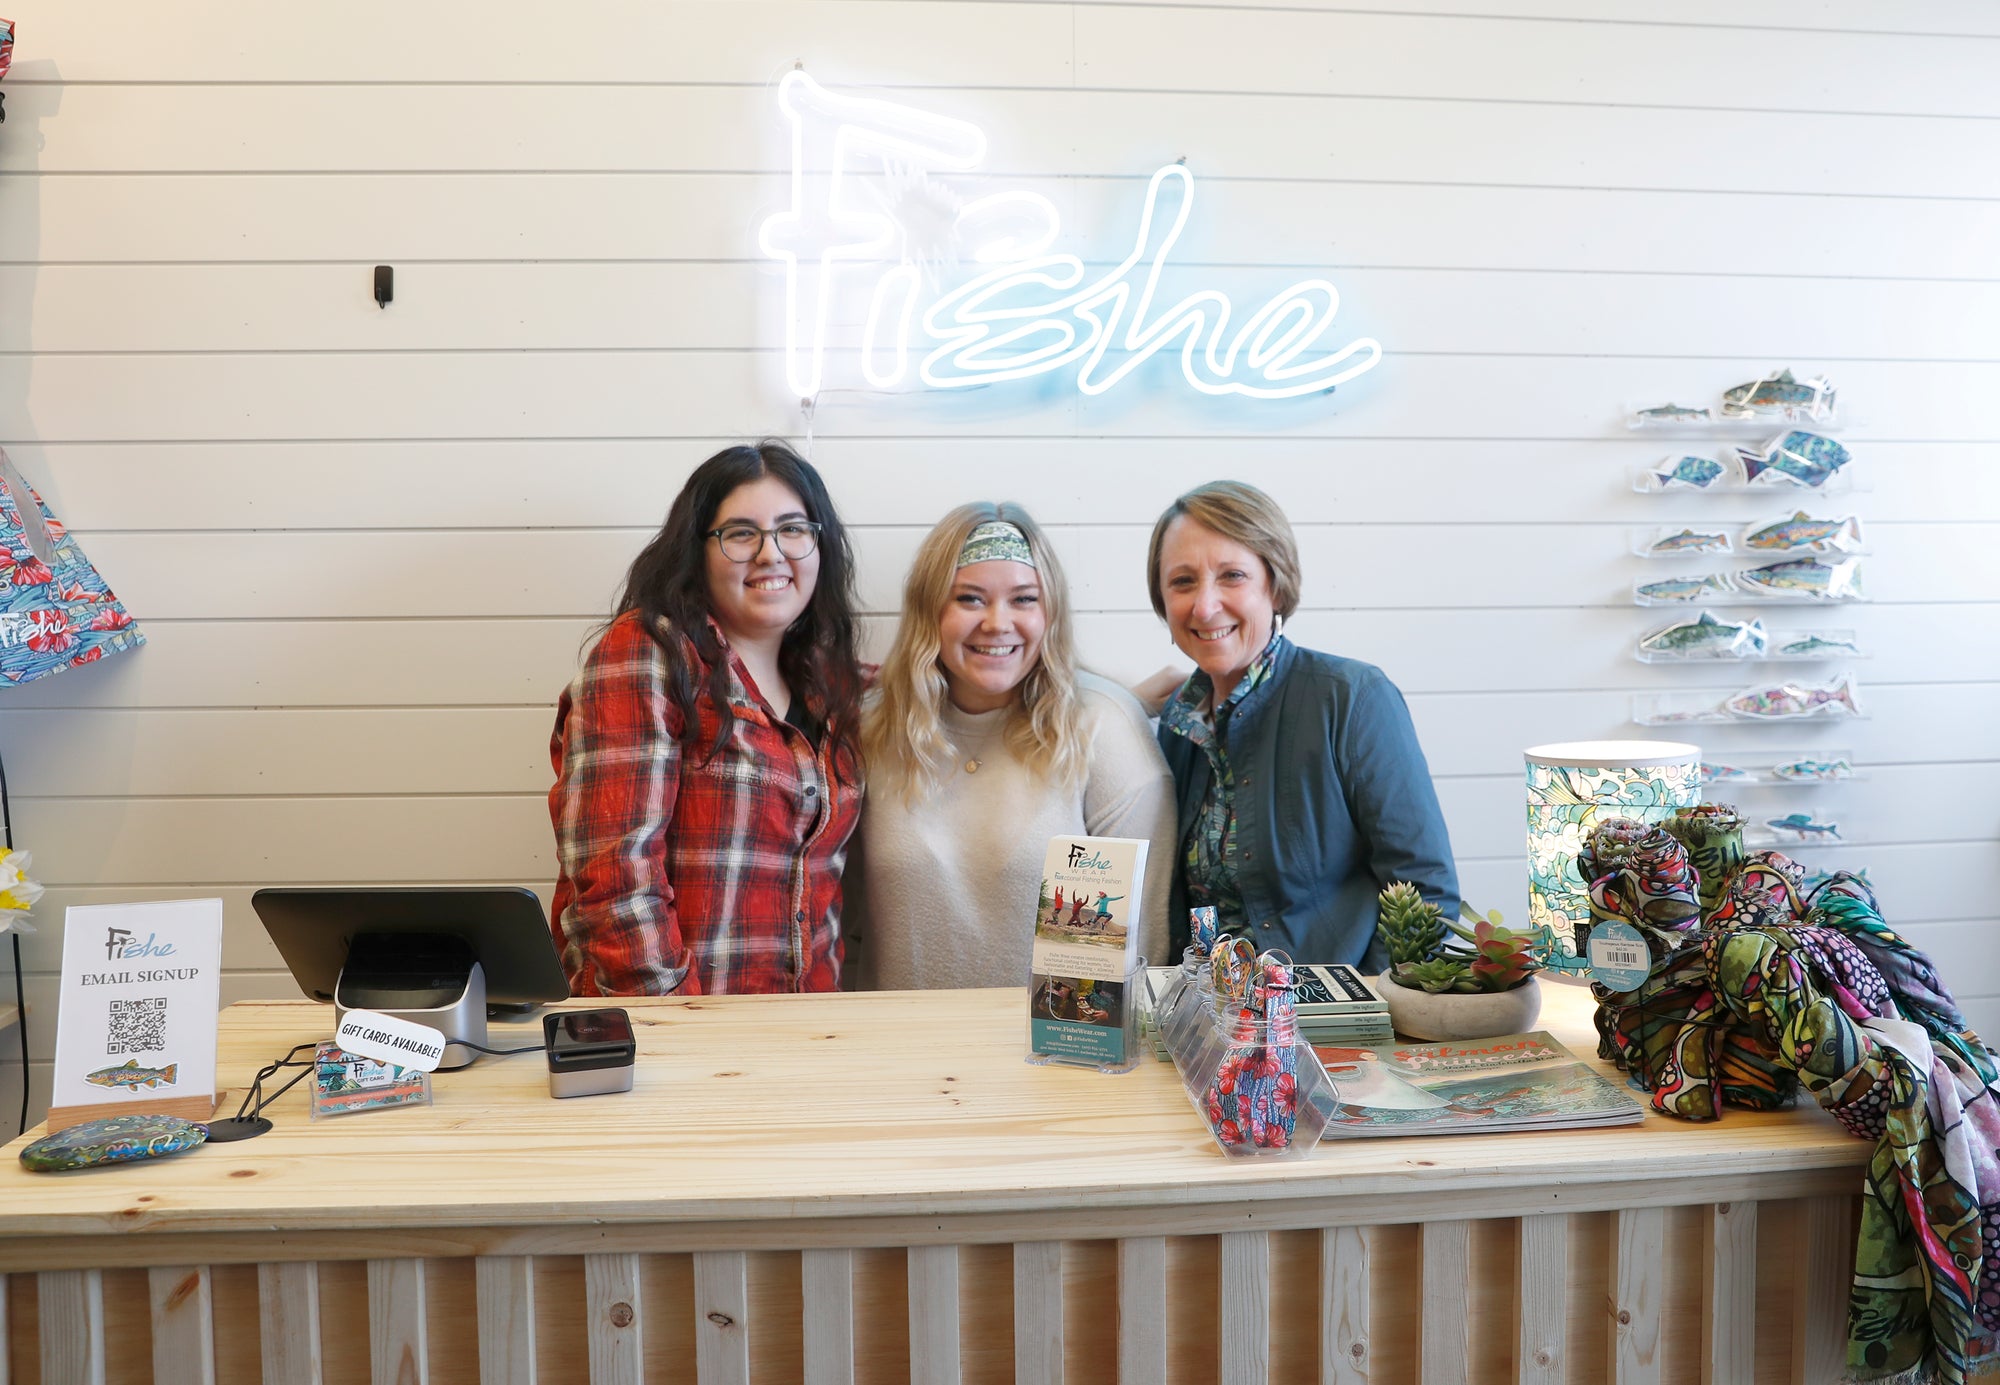 Welcoming the NEW Fishe Storefront in Downtown Anchorage!